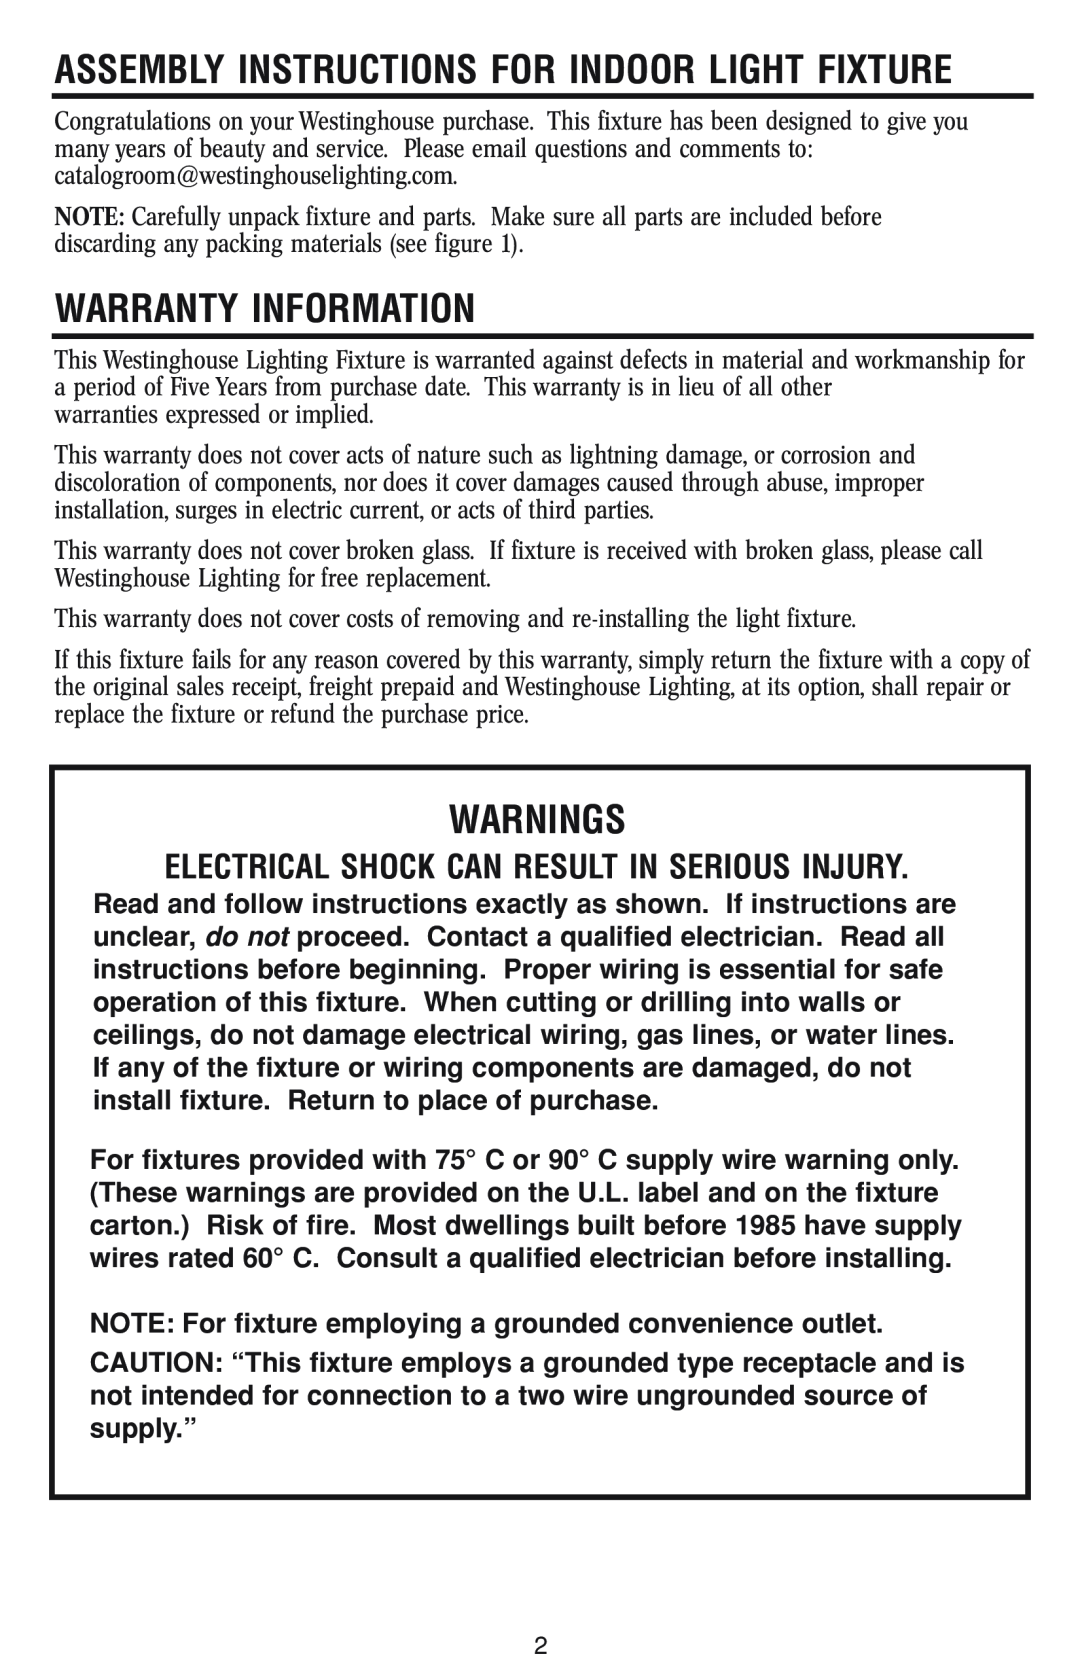 Westinghouse W-011 owner manual Warranty Information, Warnings, Assembly Instructions For Indoor Light Fixture 